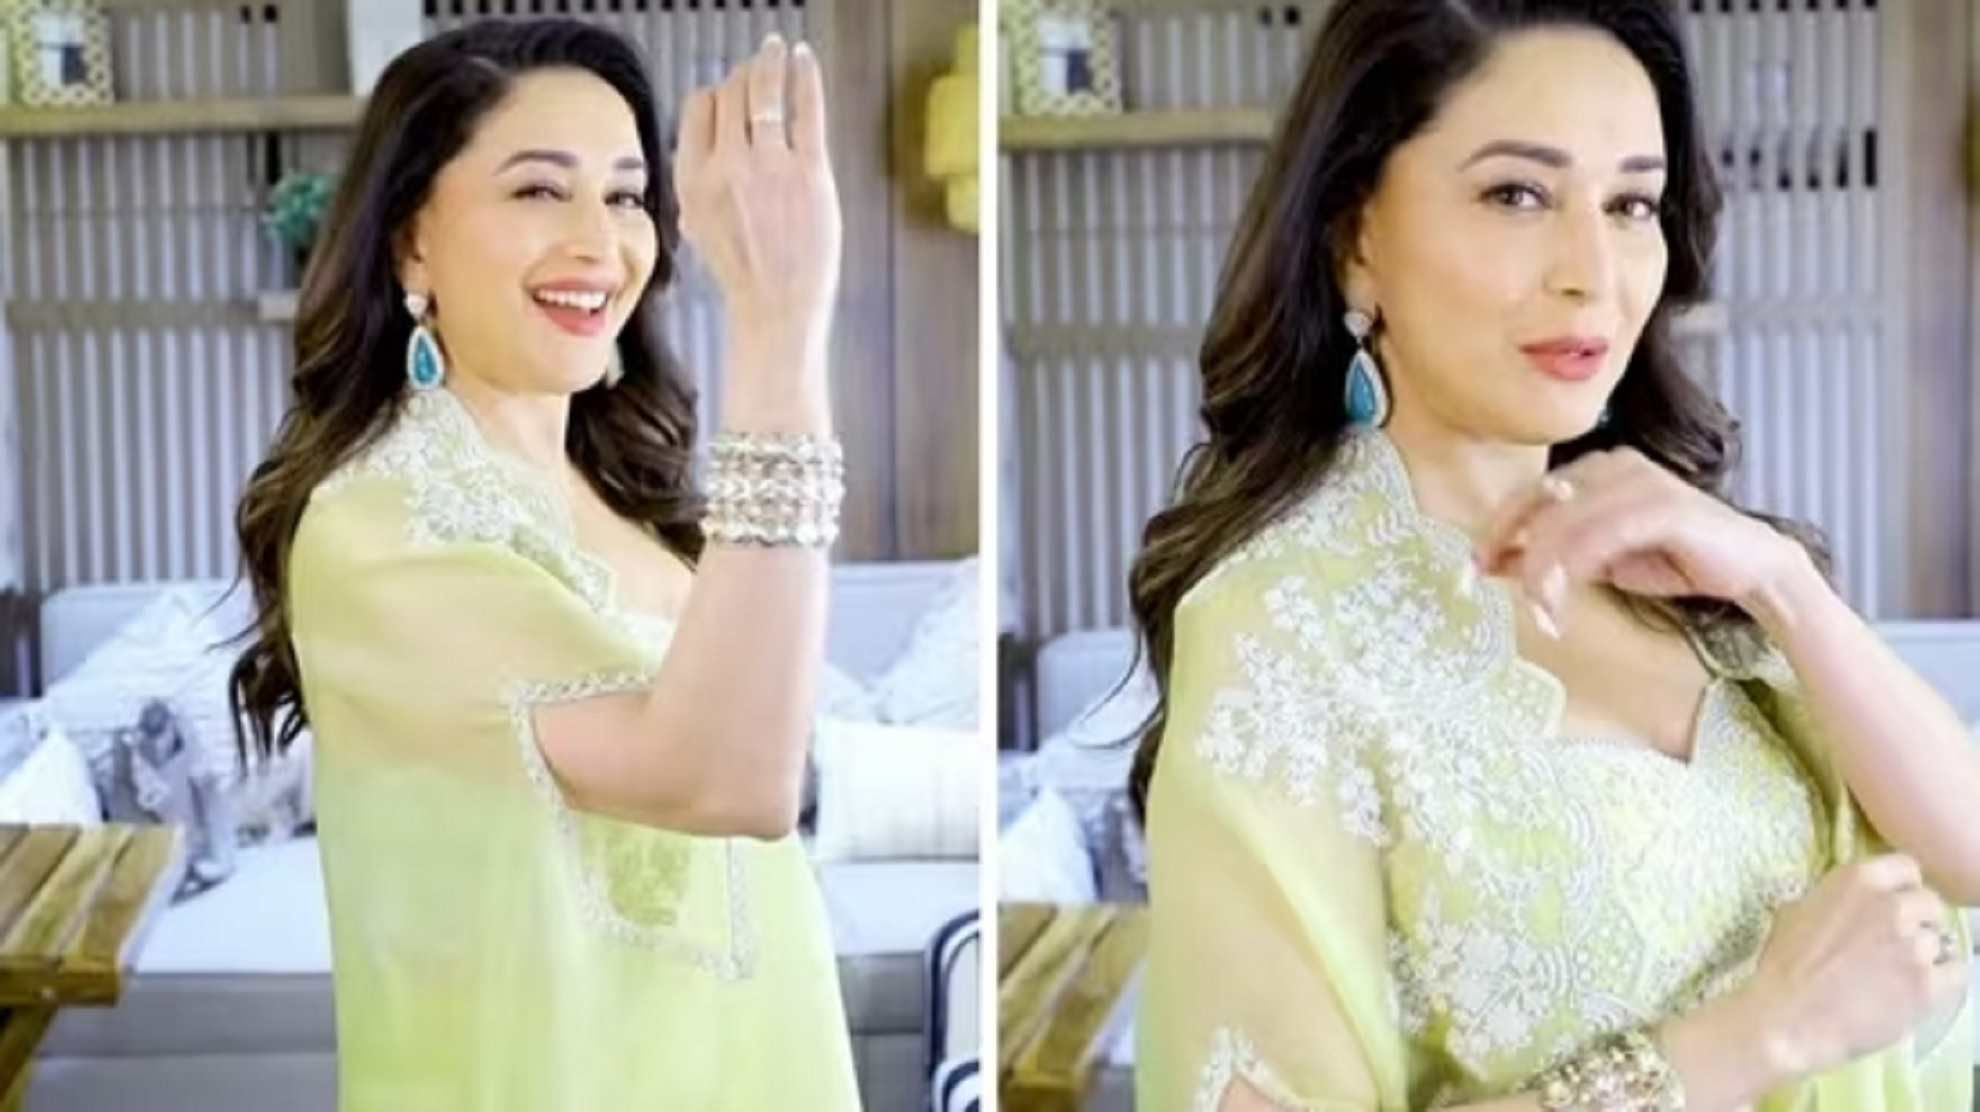 Madhuri Dixit Dances To Qala’s Viral Hit Song ‘Ghode Pe Sawar’, Internet Says She Wins The Challenge